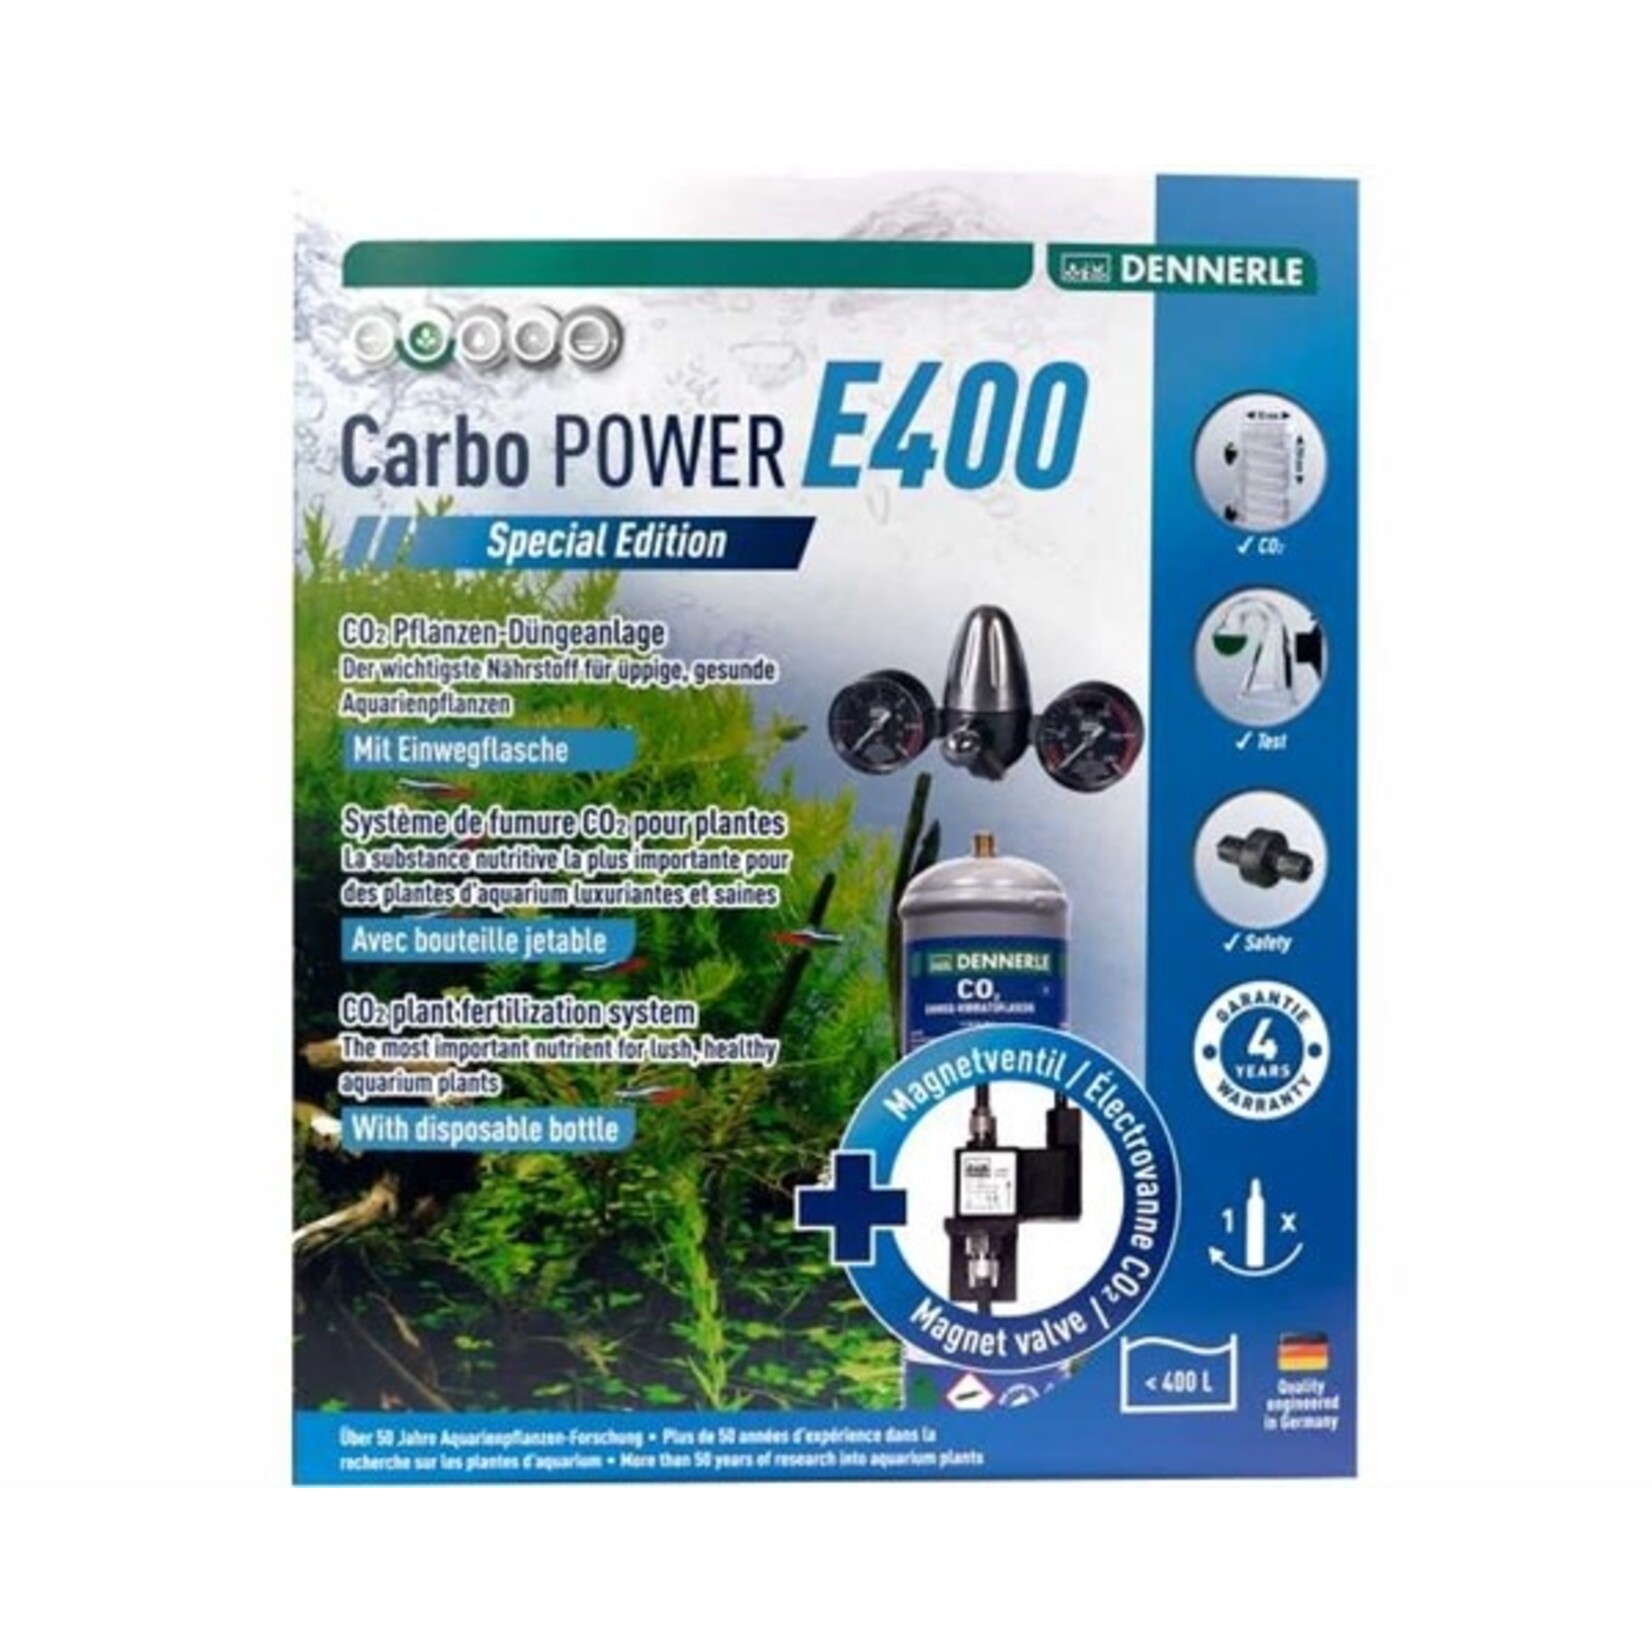 Dennerle DENNERLE CO2 WEGWERP CARBO POWER E400 SPECIAL EDITION